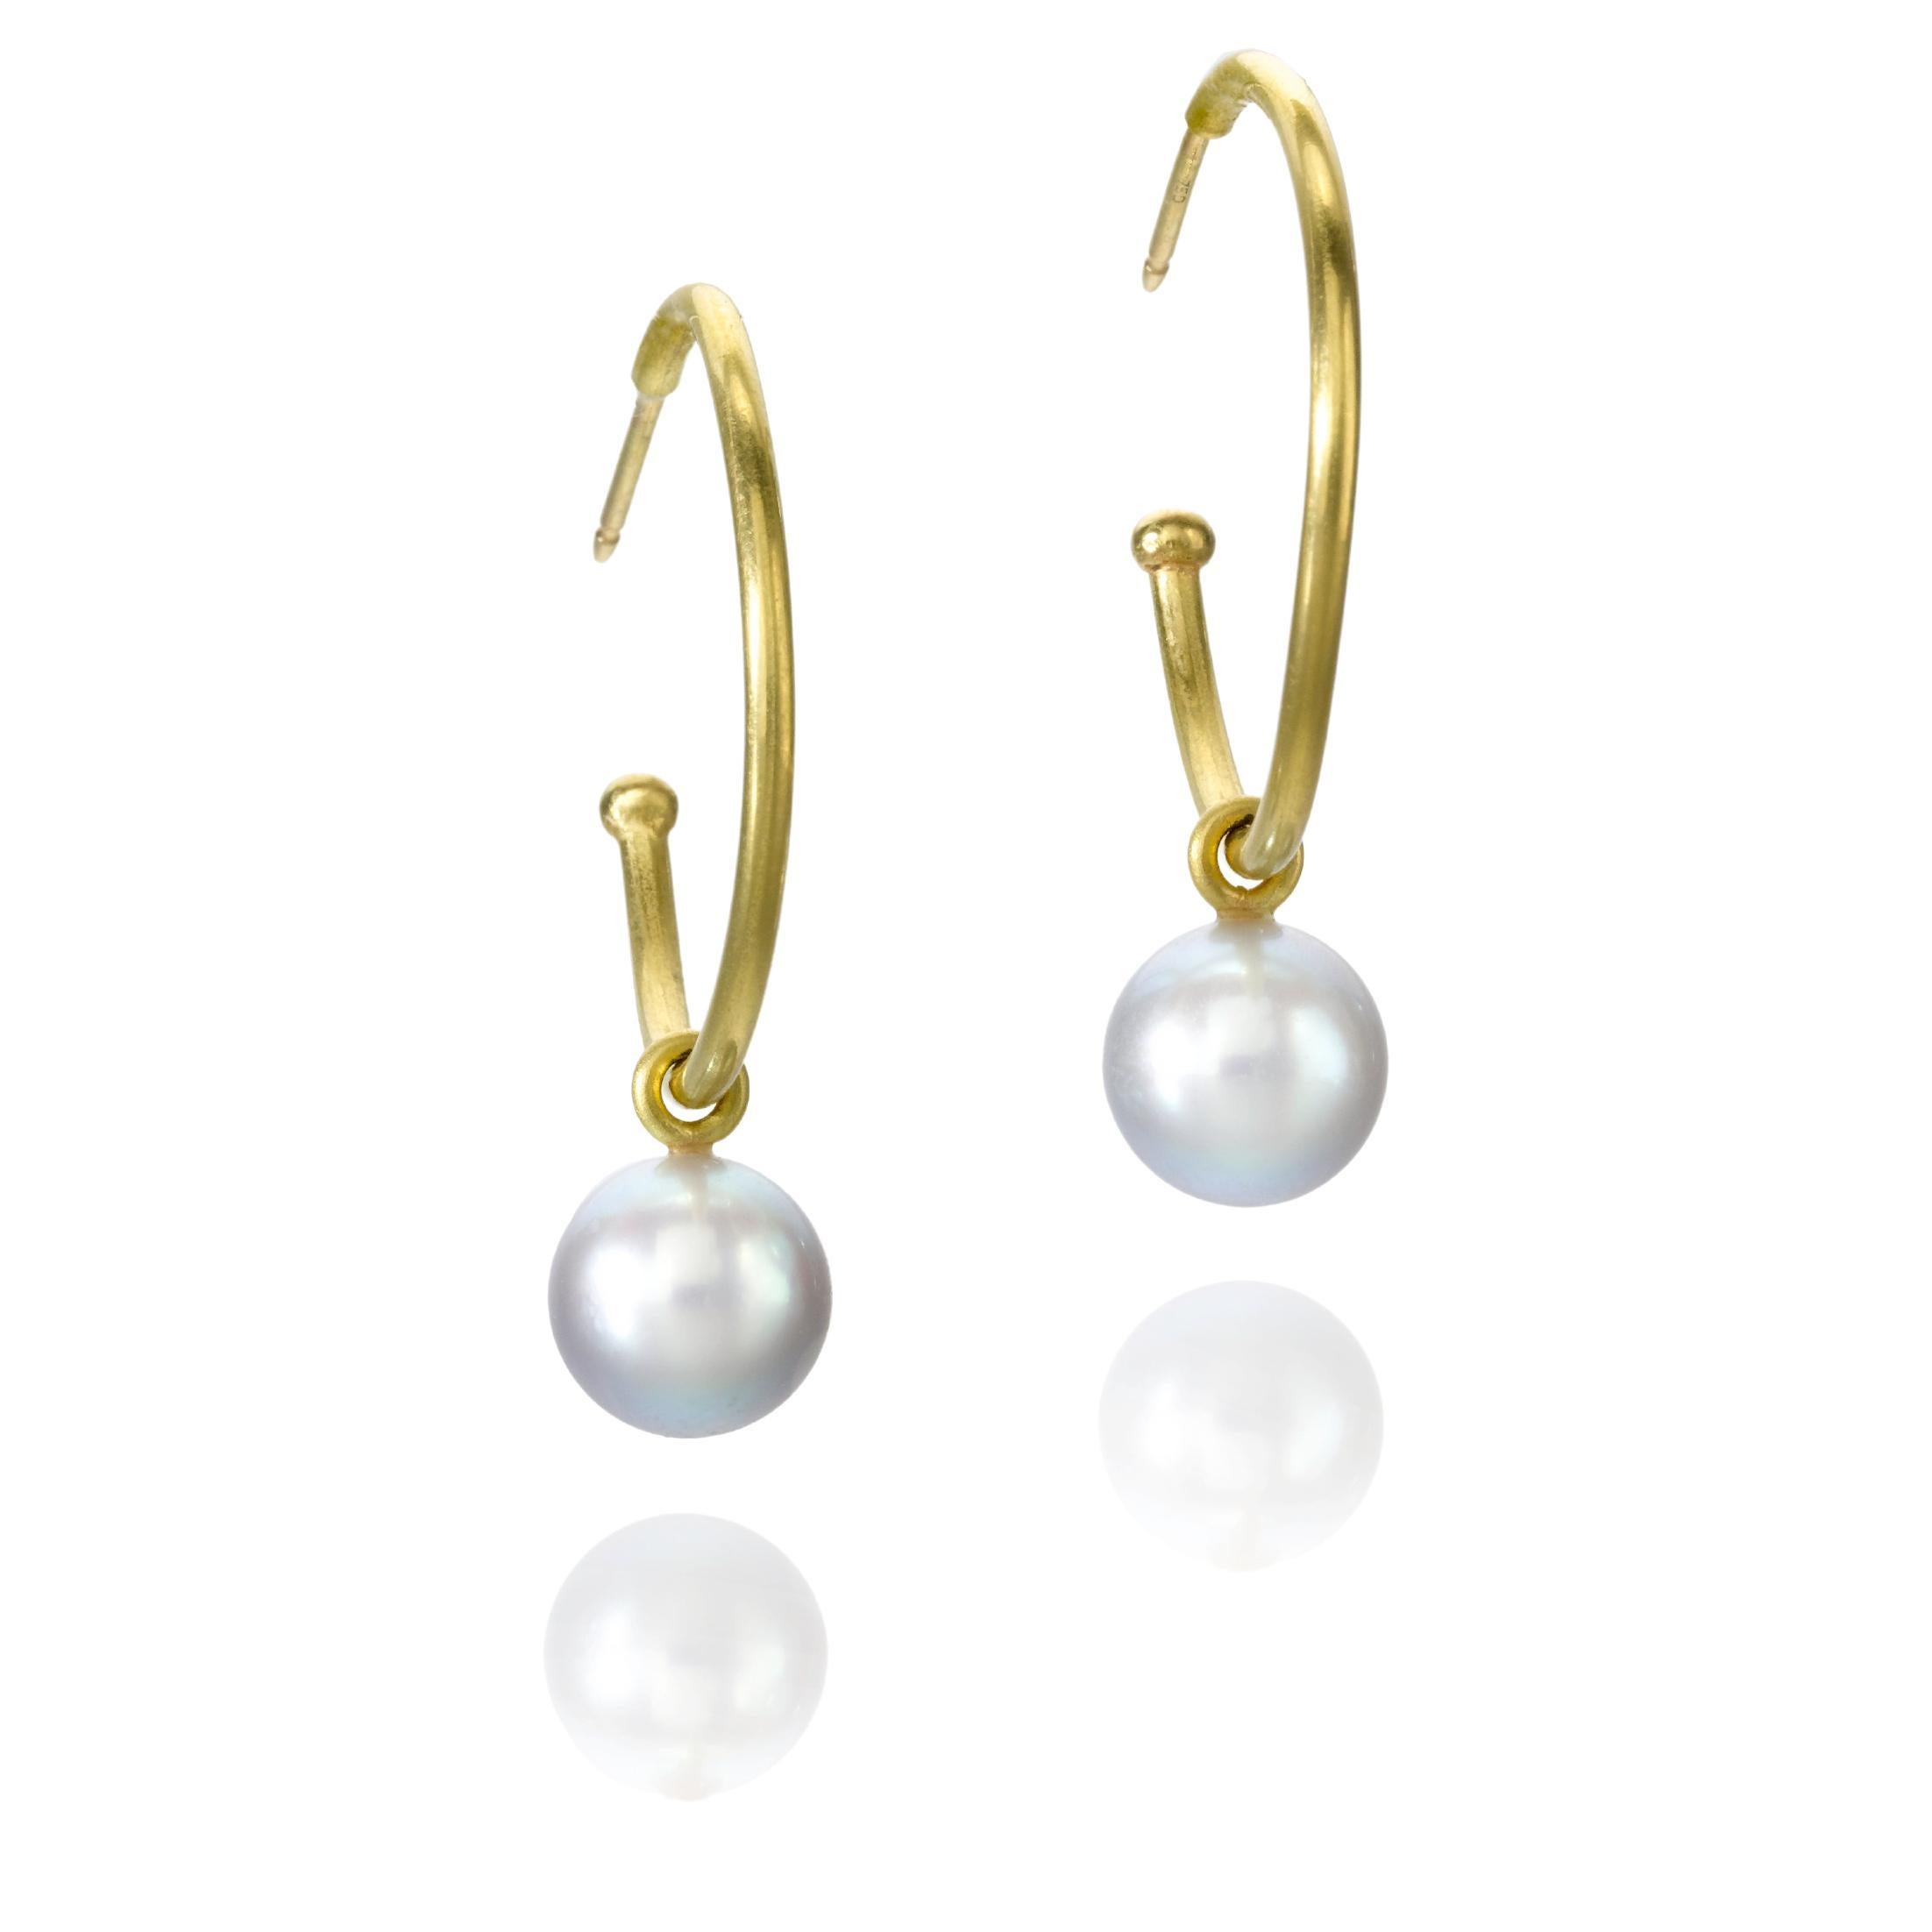 Large 20 Karat hoops with South Sea white Pearls For Sale at 1stDibs